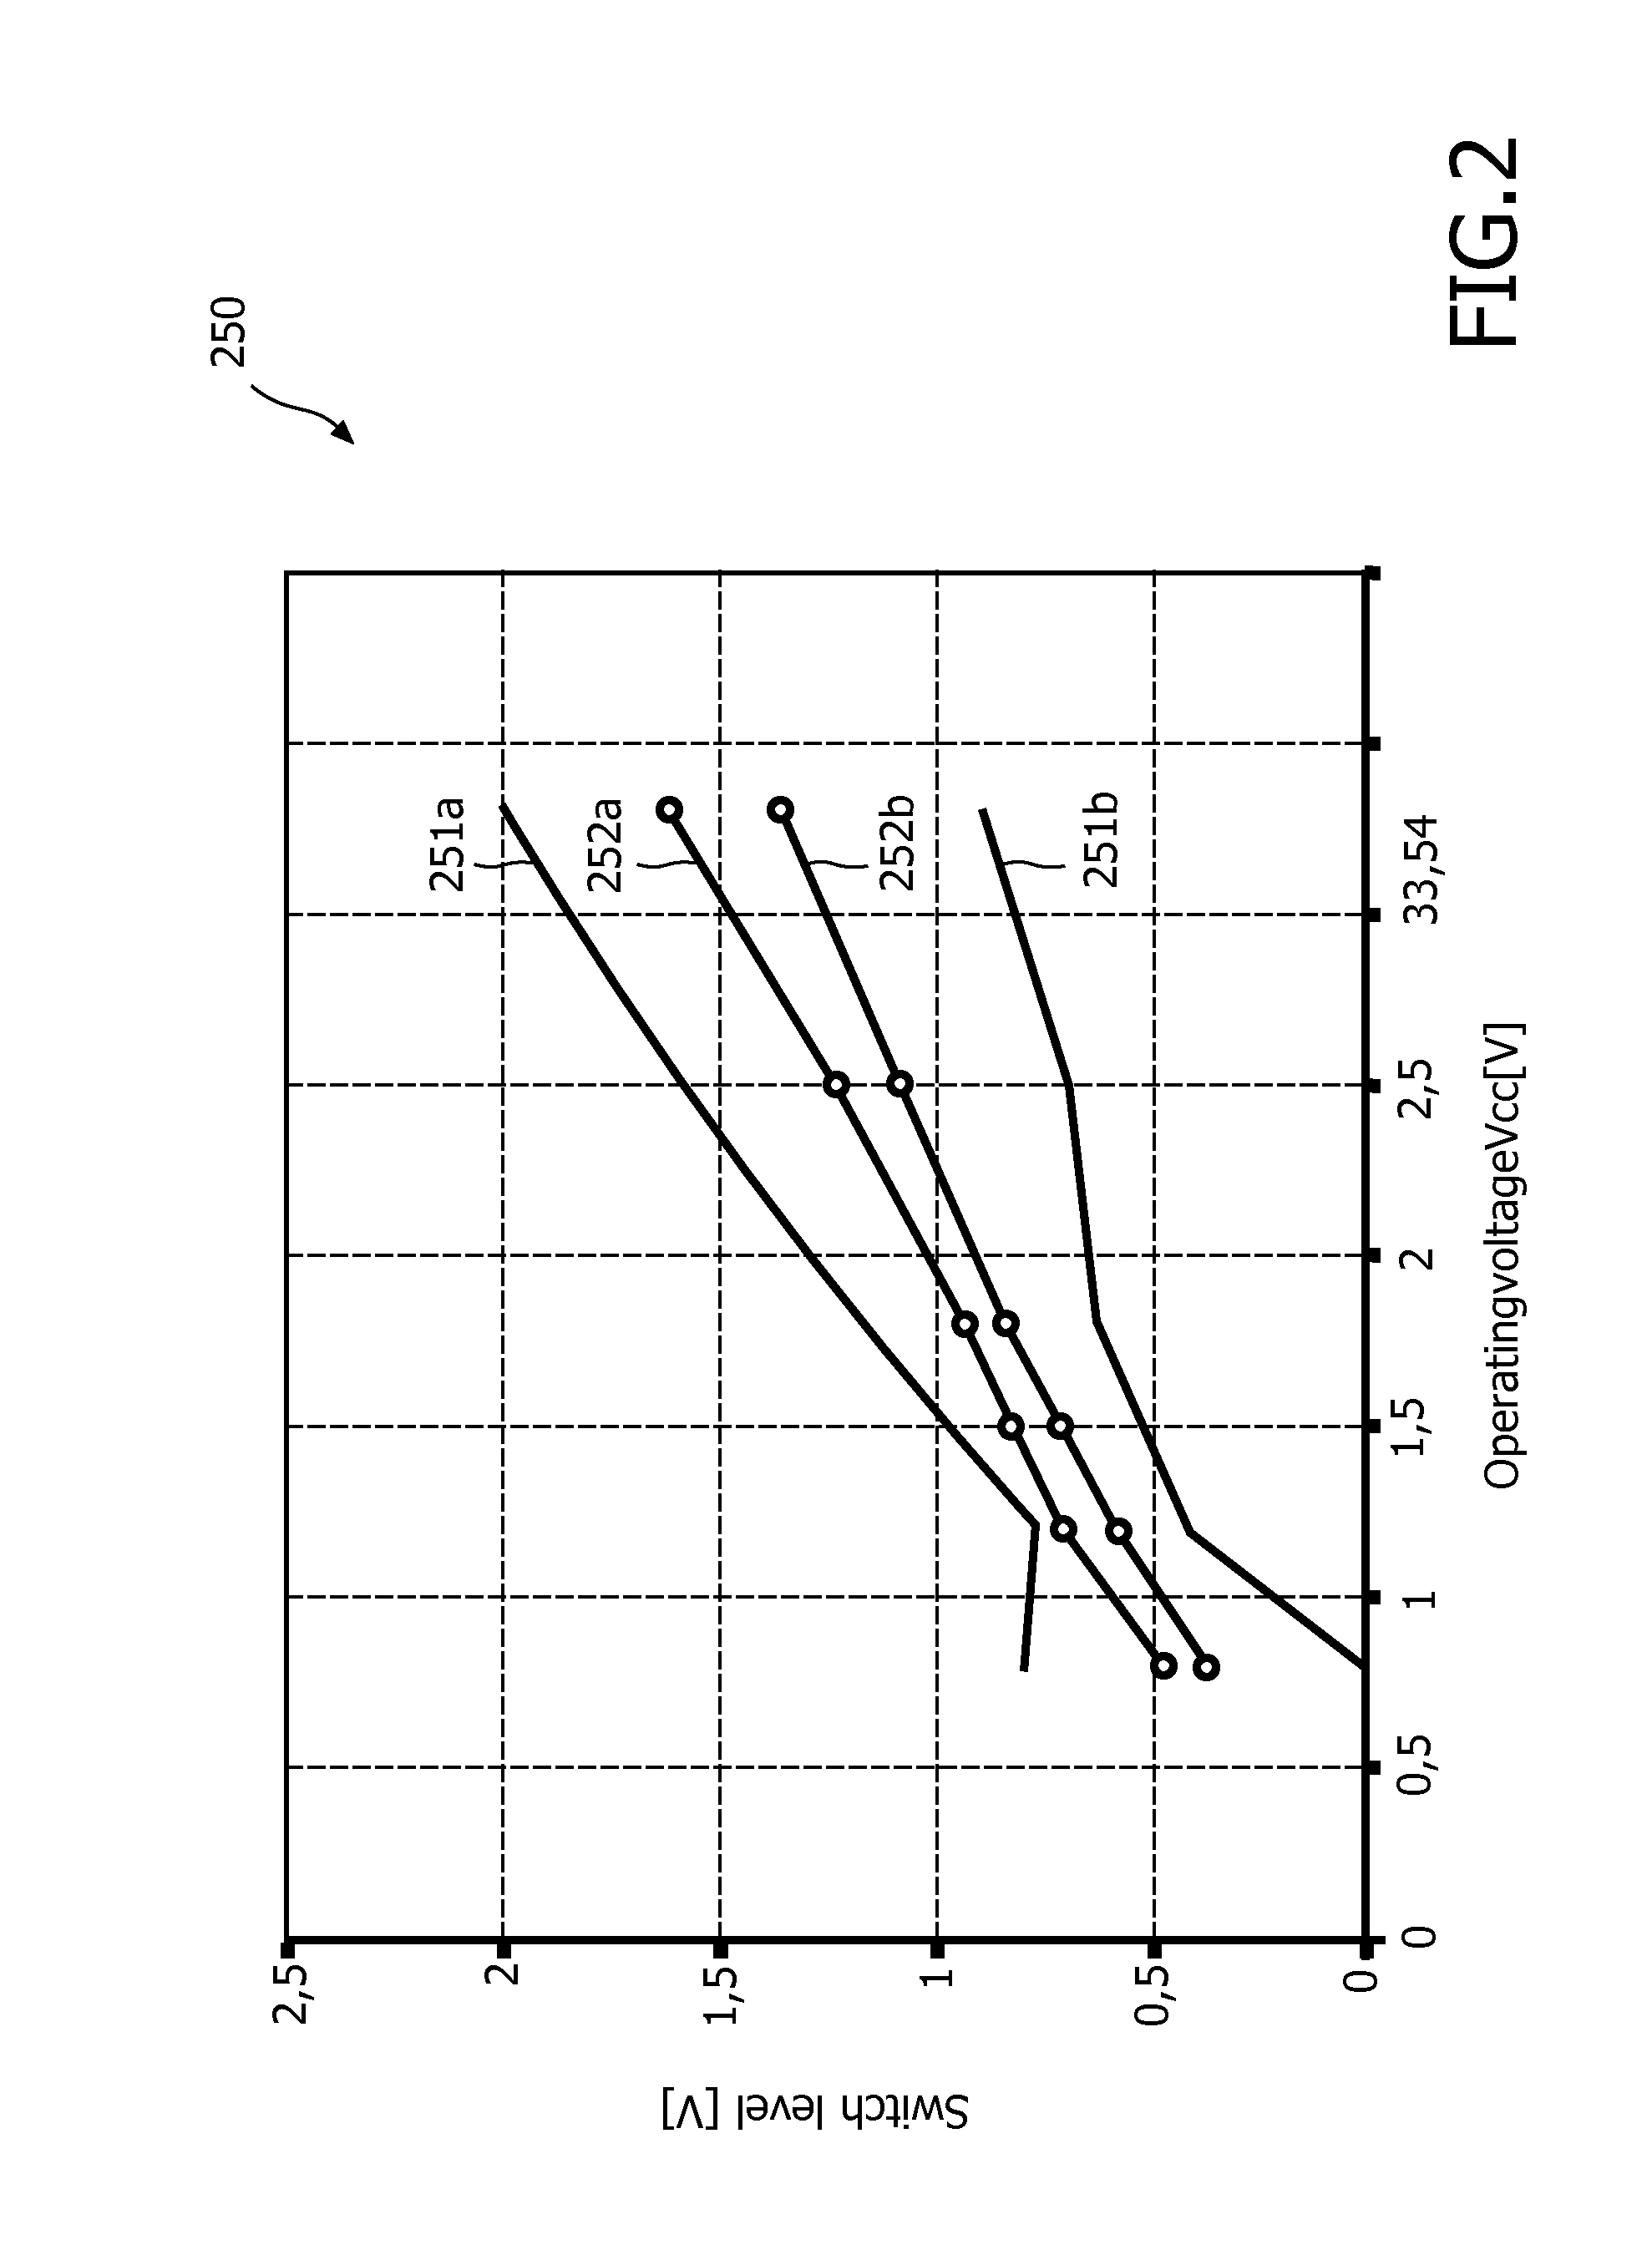 Transformation of an input signal into a logical output voltage level with a hysteresis behavior